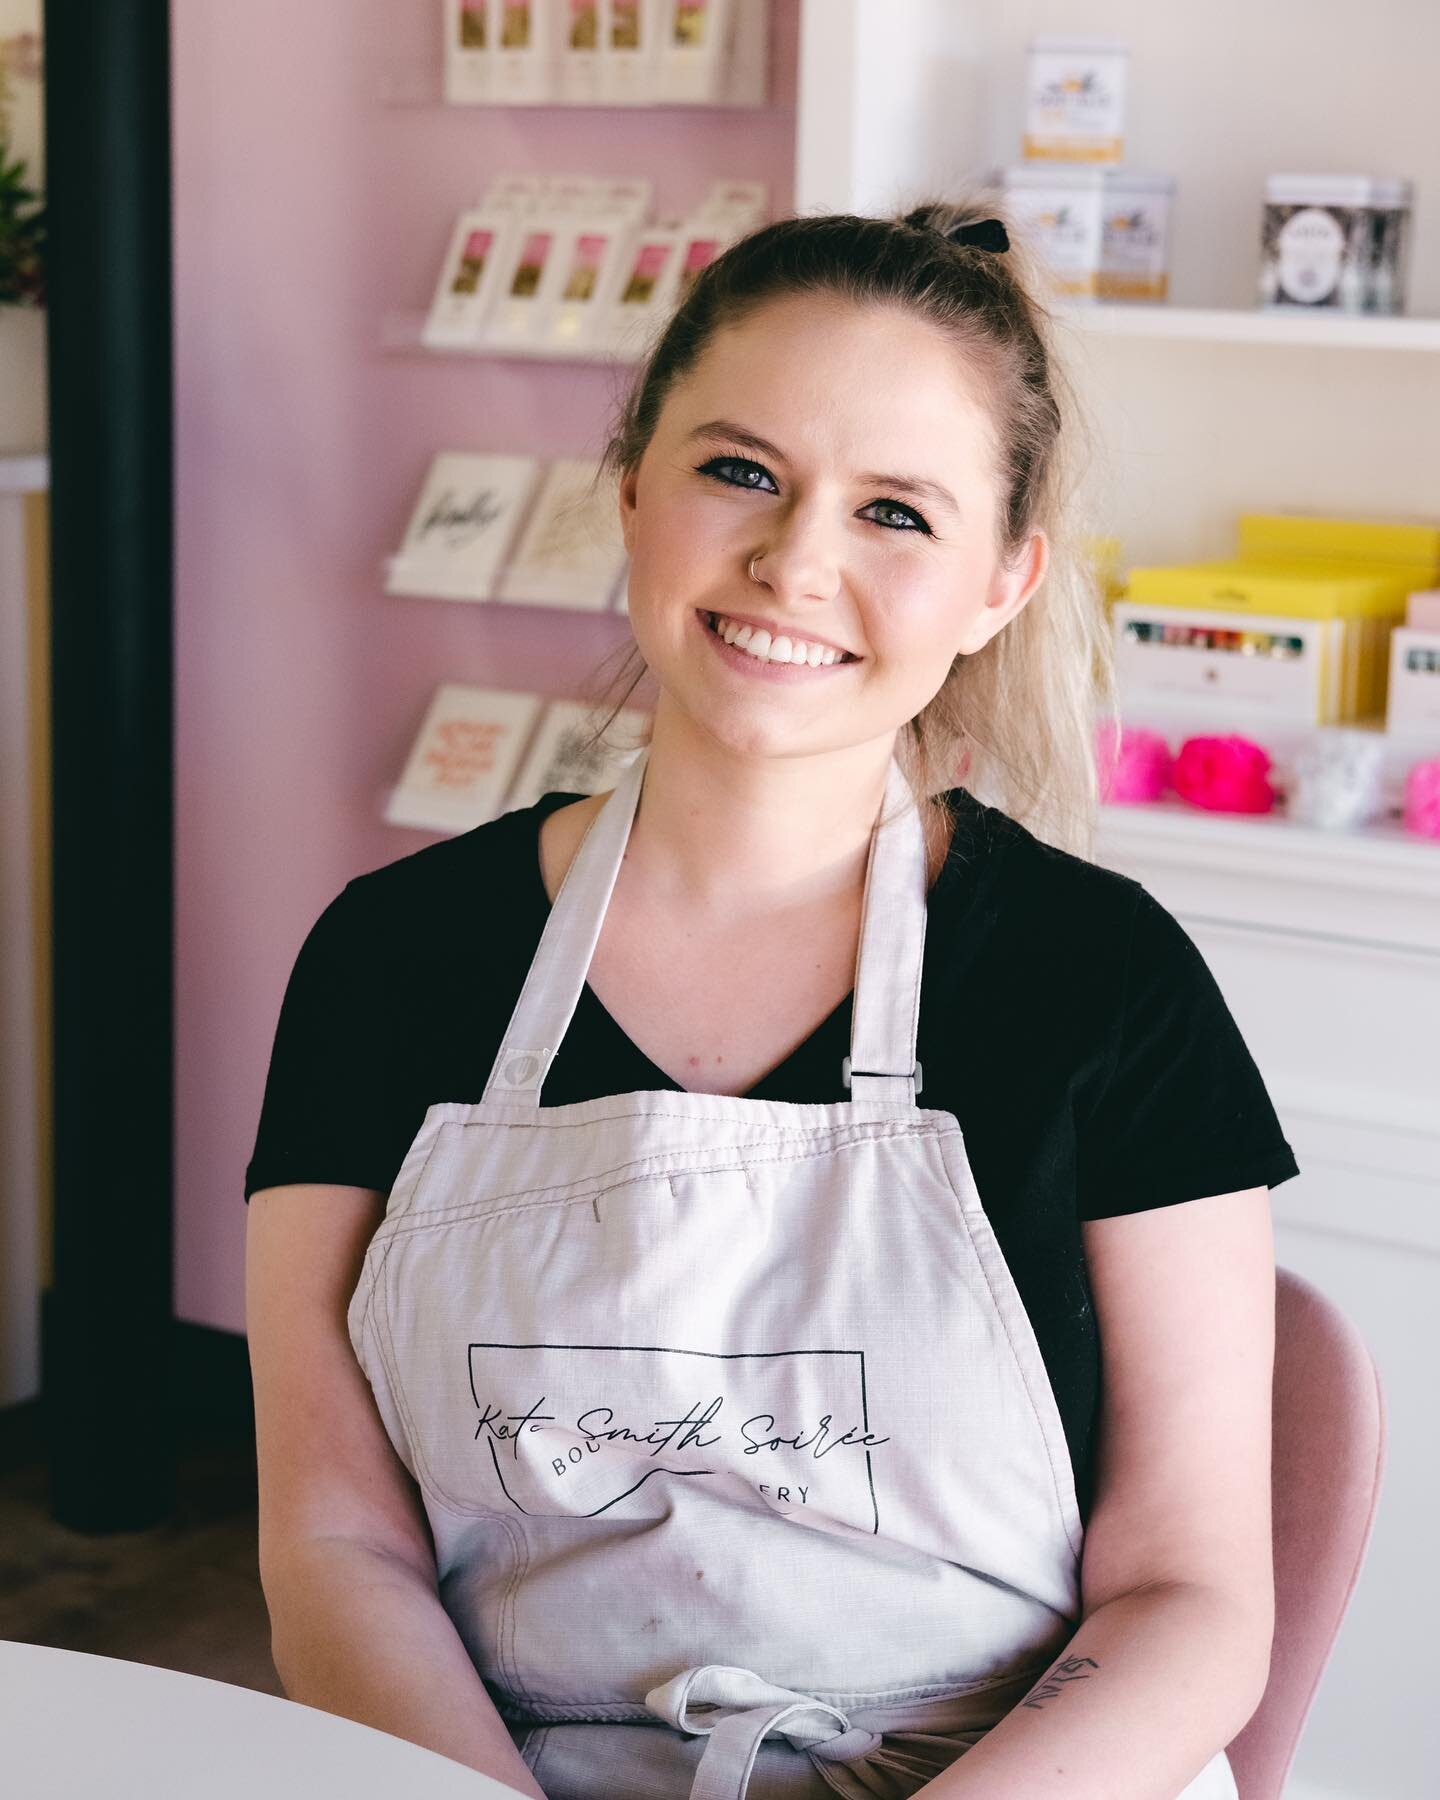 Say hello to Riley! Riley has been an assistant baker at Kate Smith Soir&eacute;e for 3 months! A few fun facts about Riley:
✨She is a licensed esthetician and makeup artist
✨Christmas is her favorite holiday
✨Her favorite treat from the bakery: Lite